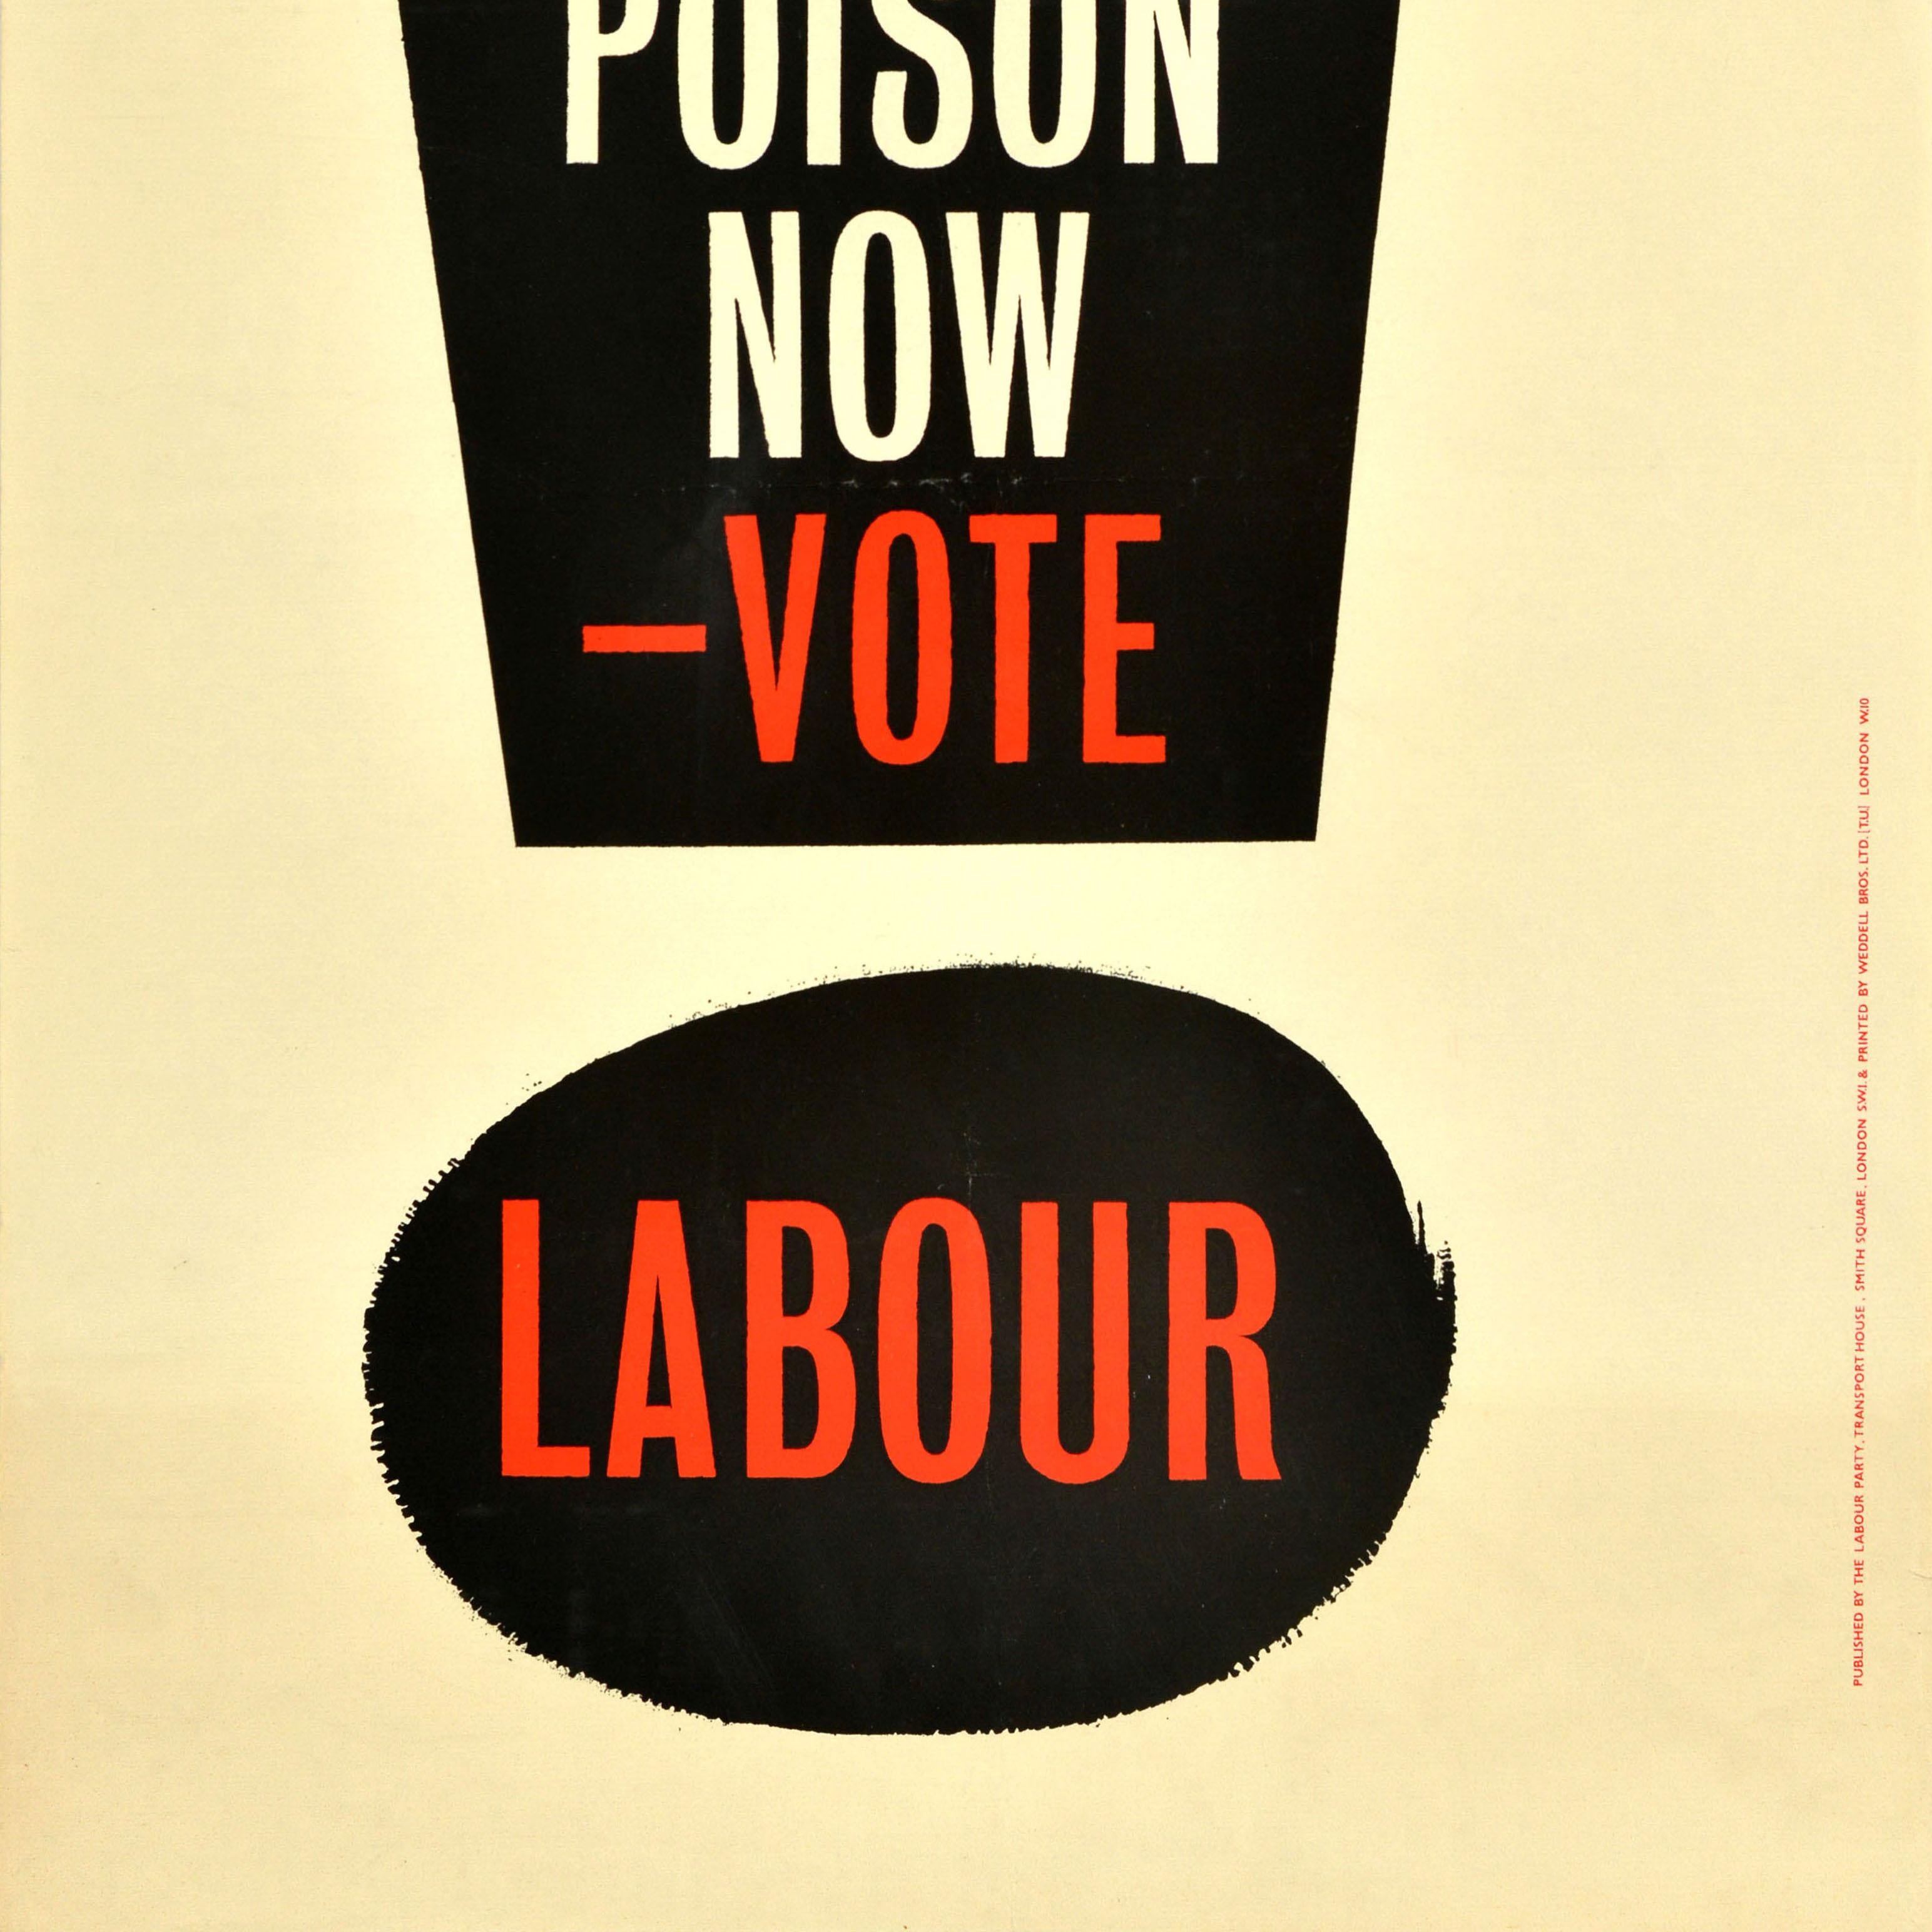 Original vintage political General Election poster issued by the Labour Party against the hydrogen bomb featuring a dynamic design with the bold white and red letters inside a black exclamation mark - Stop H-Bomb Poison Now Vote Labour. Printed by